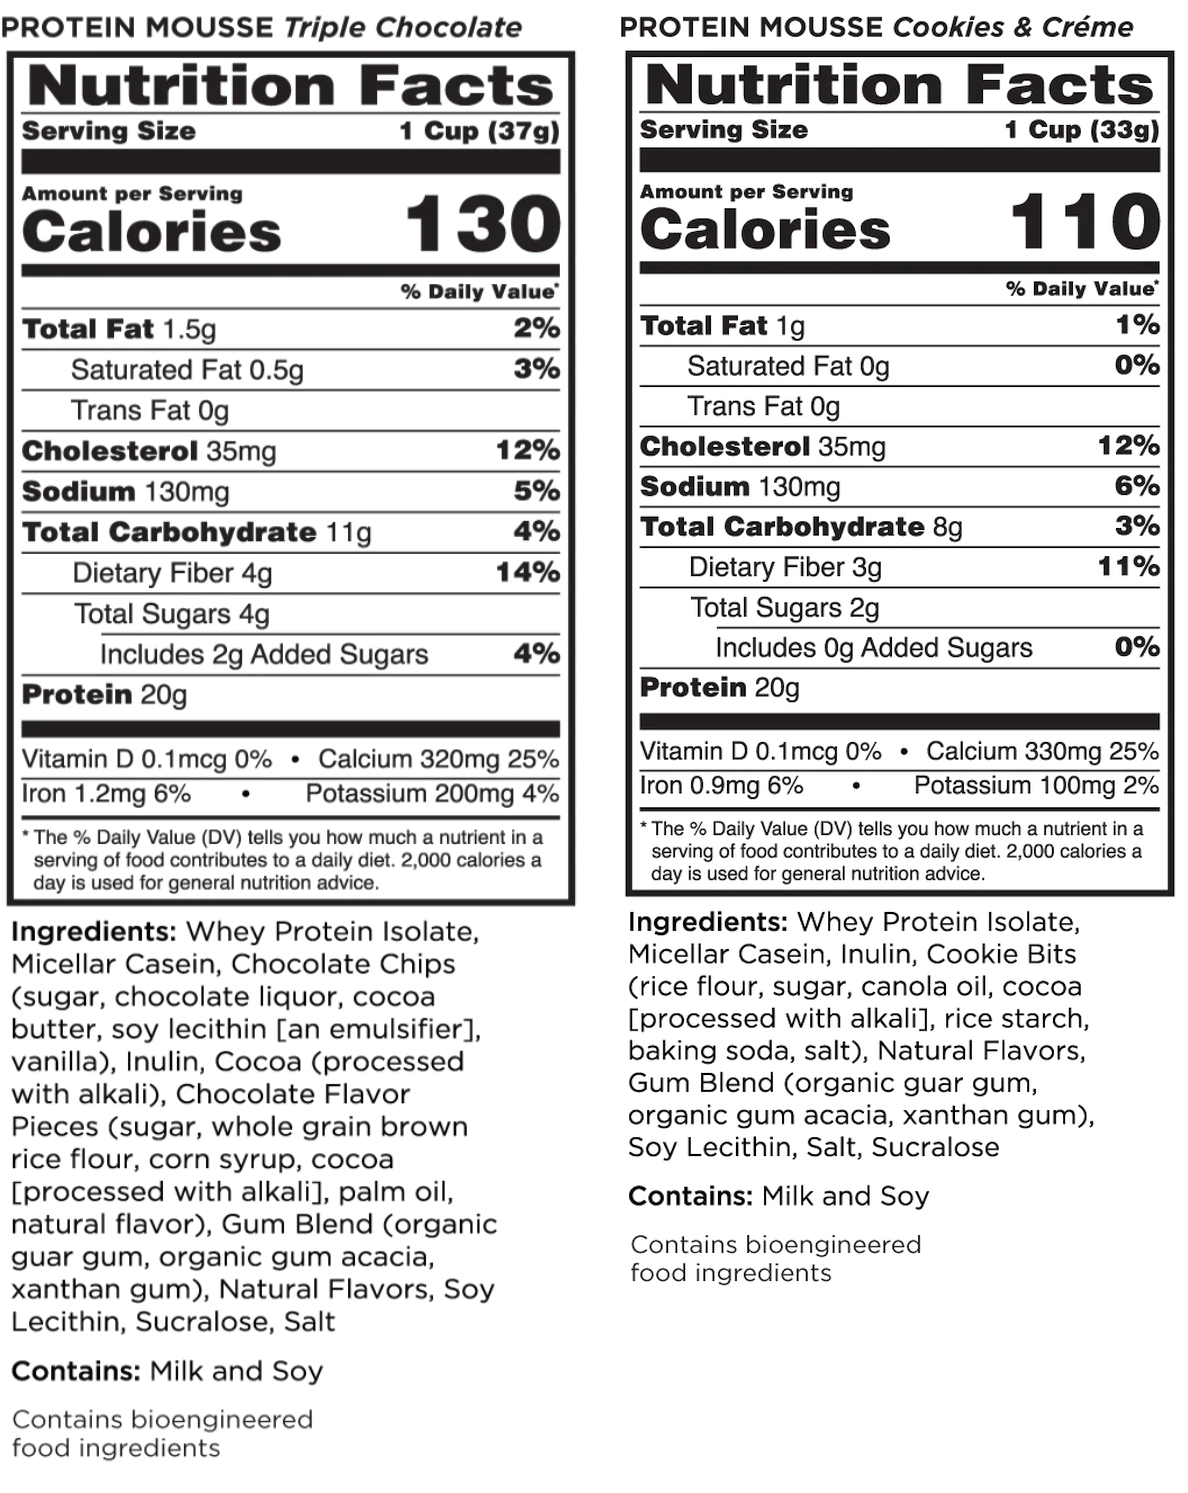 Nutrition facts for Protein Mousse in 'Triple Chocolate' and 'Cookies & Crème' flavors. Each 1 cup serving has 20g protein and other nutrients.